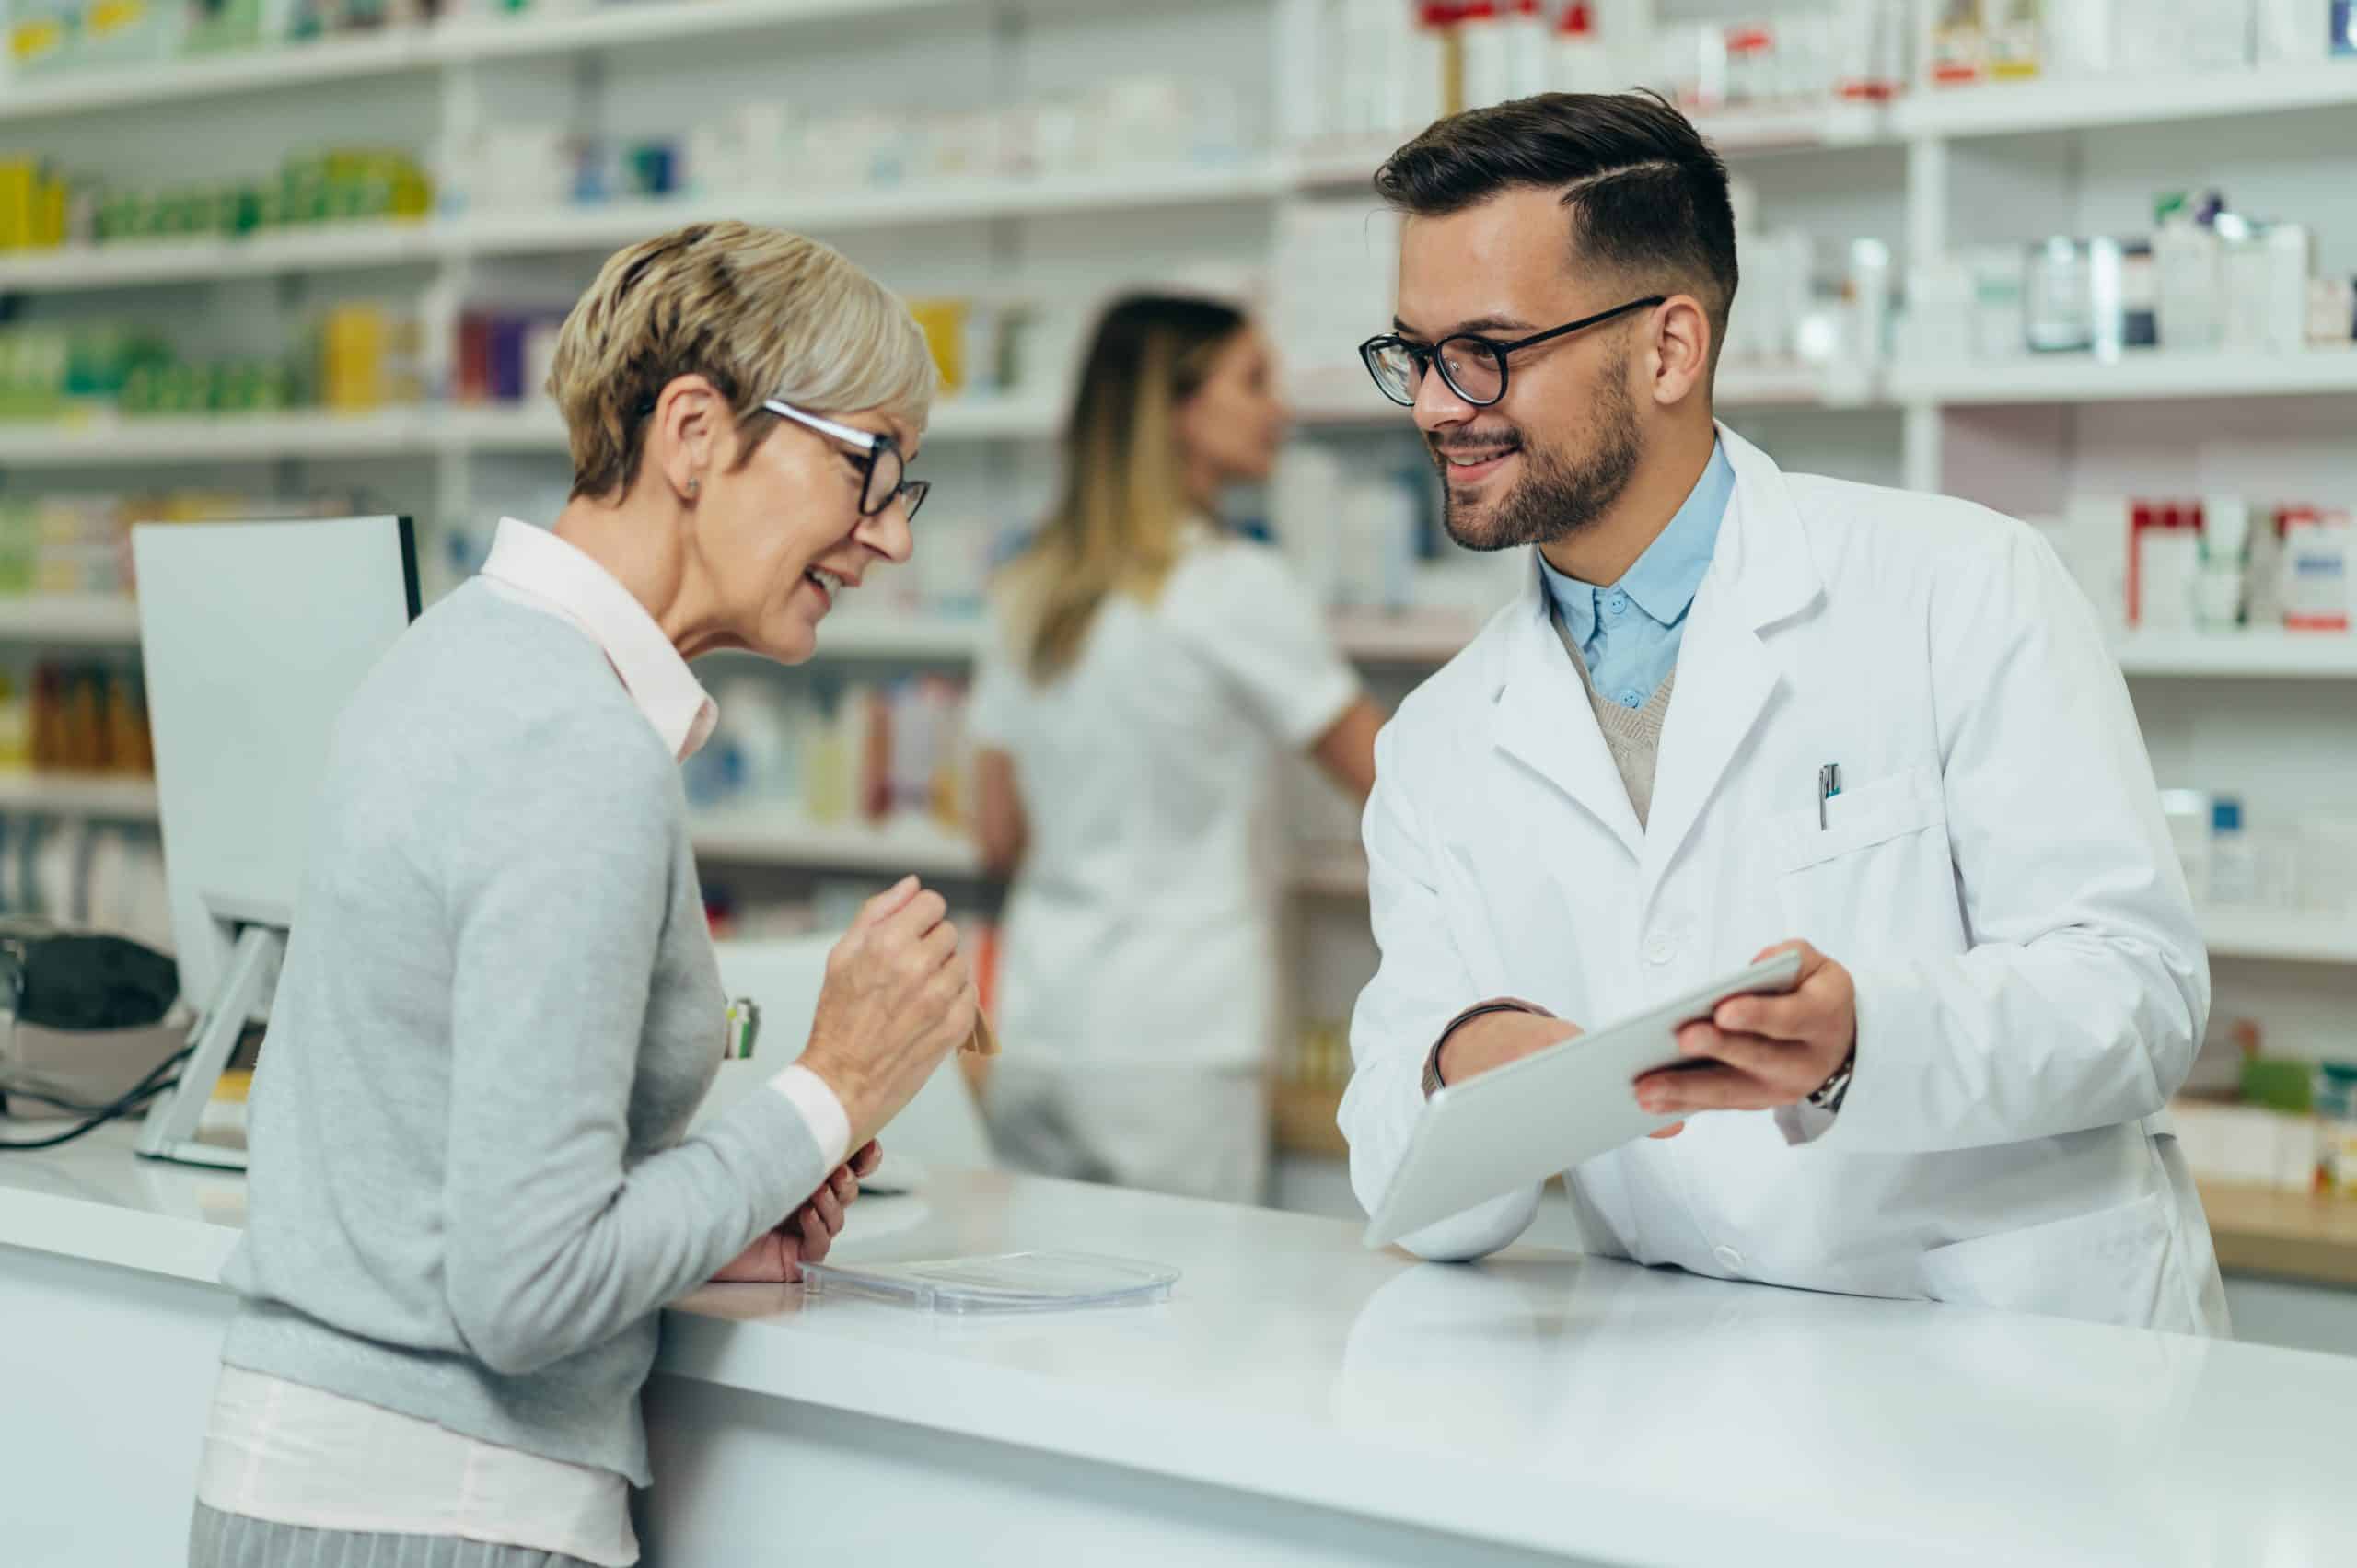 Male pharmacist helping out a woman